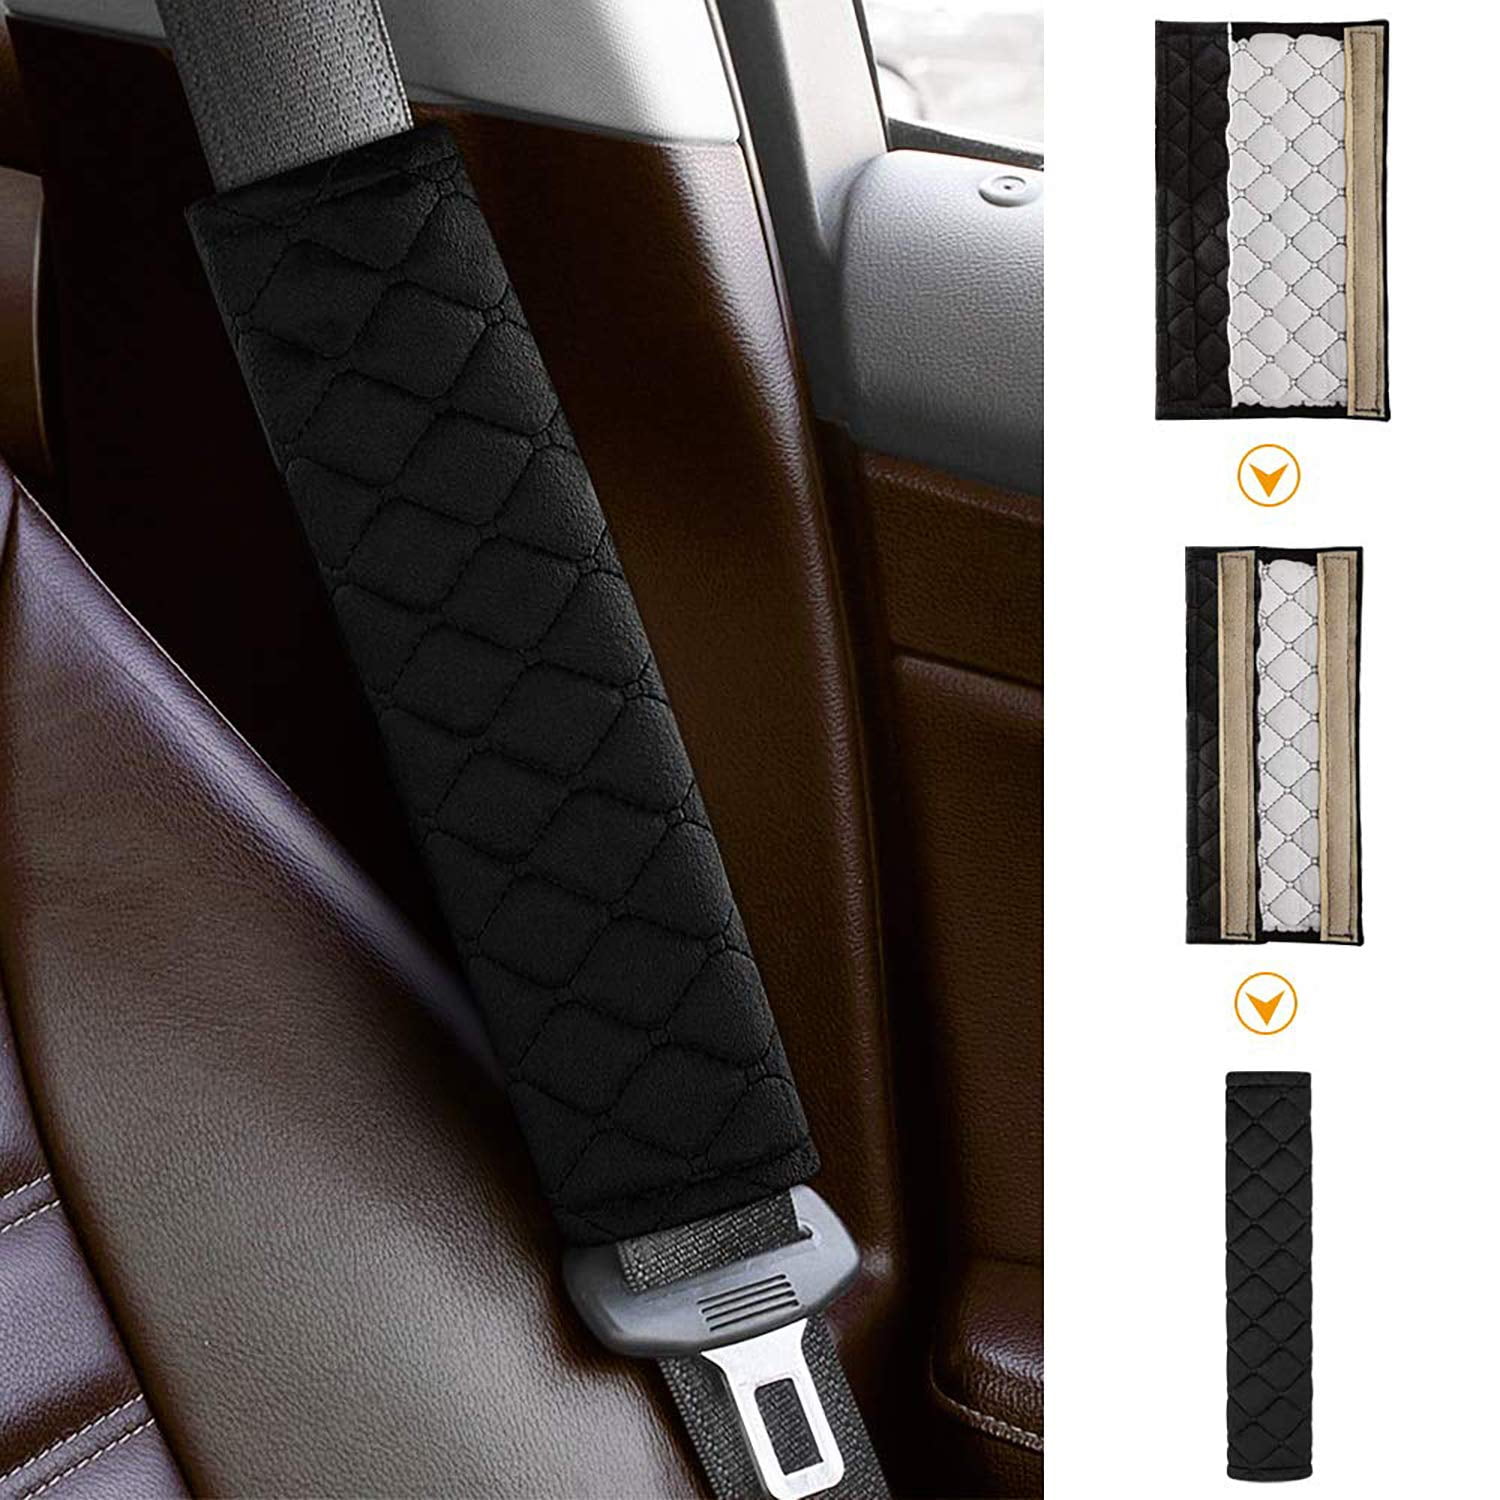 2Pack Universal Car Seat Belt Covers Pads Auto Comfortable Shoulder Safety Seatbelt Strap Covers Black 